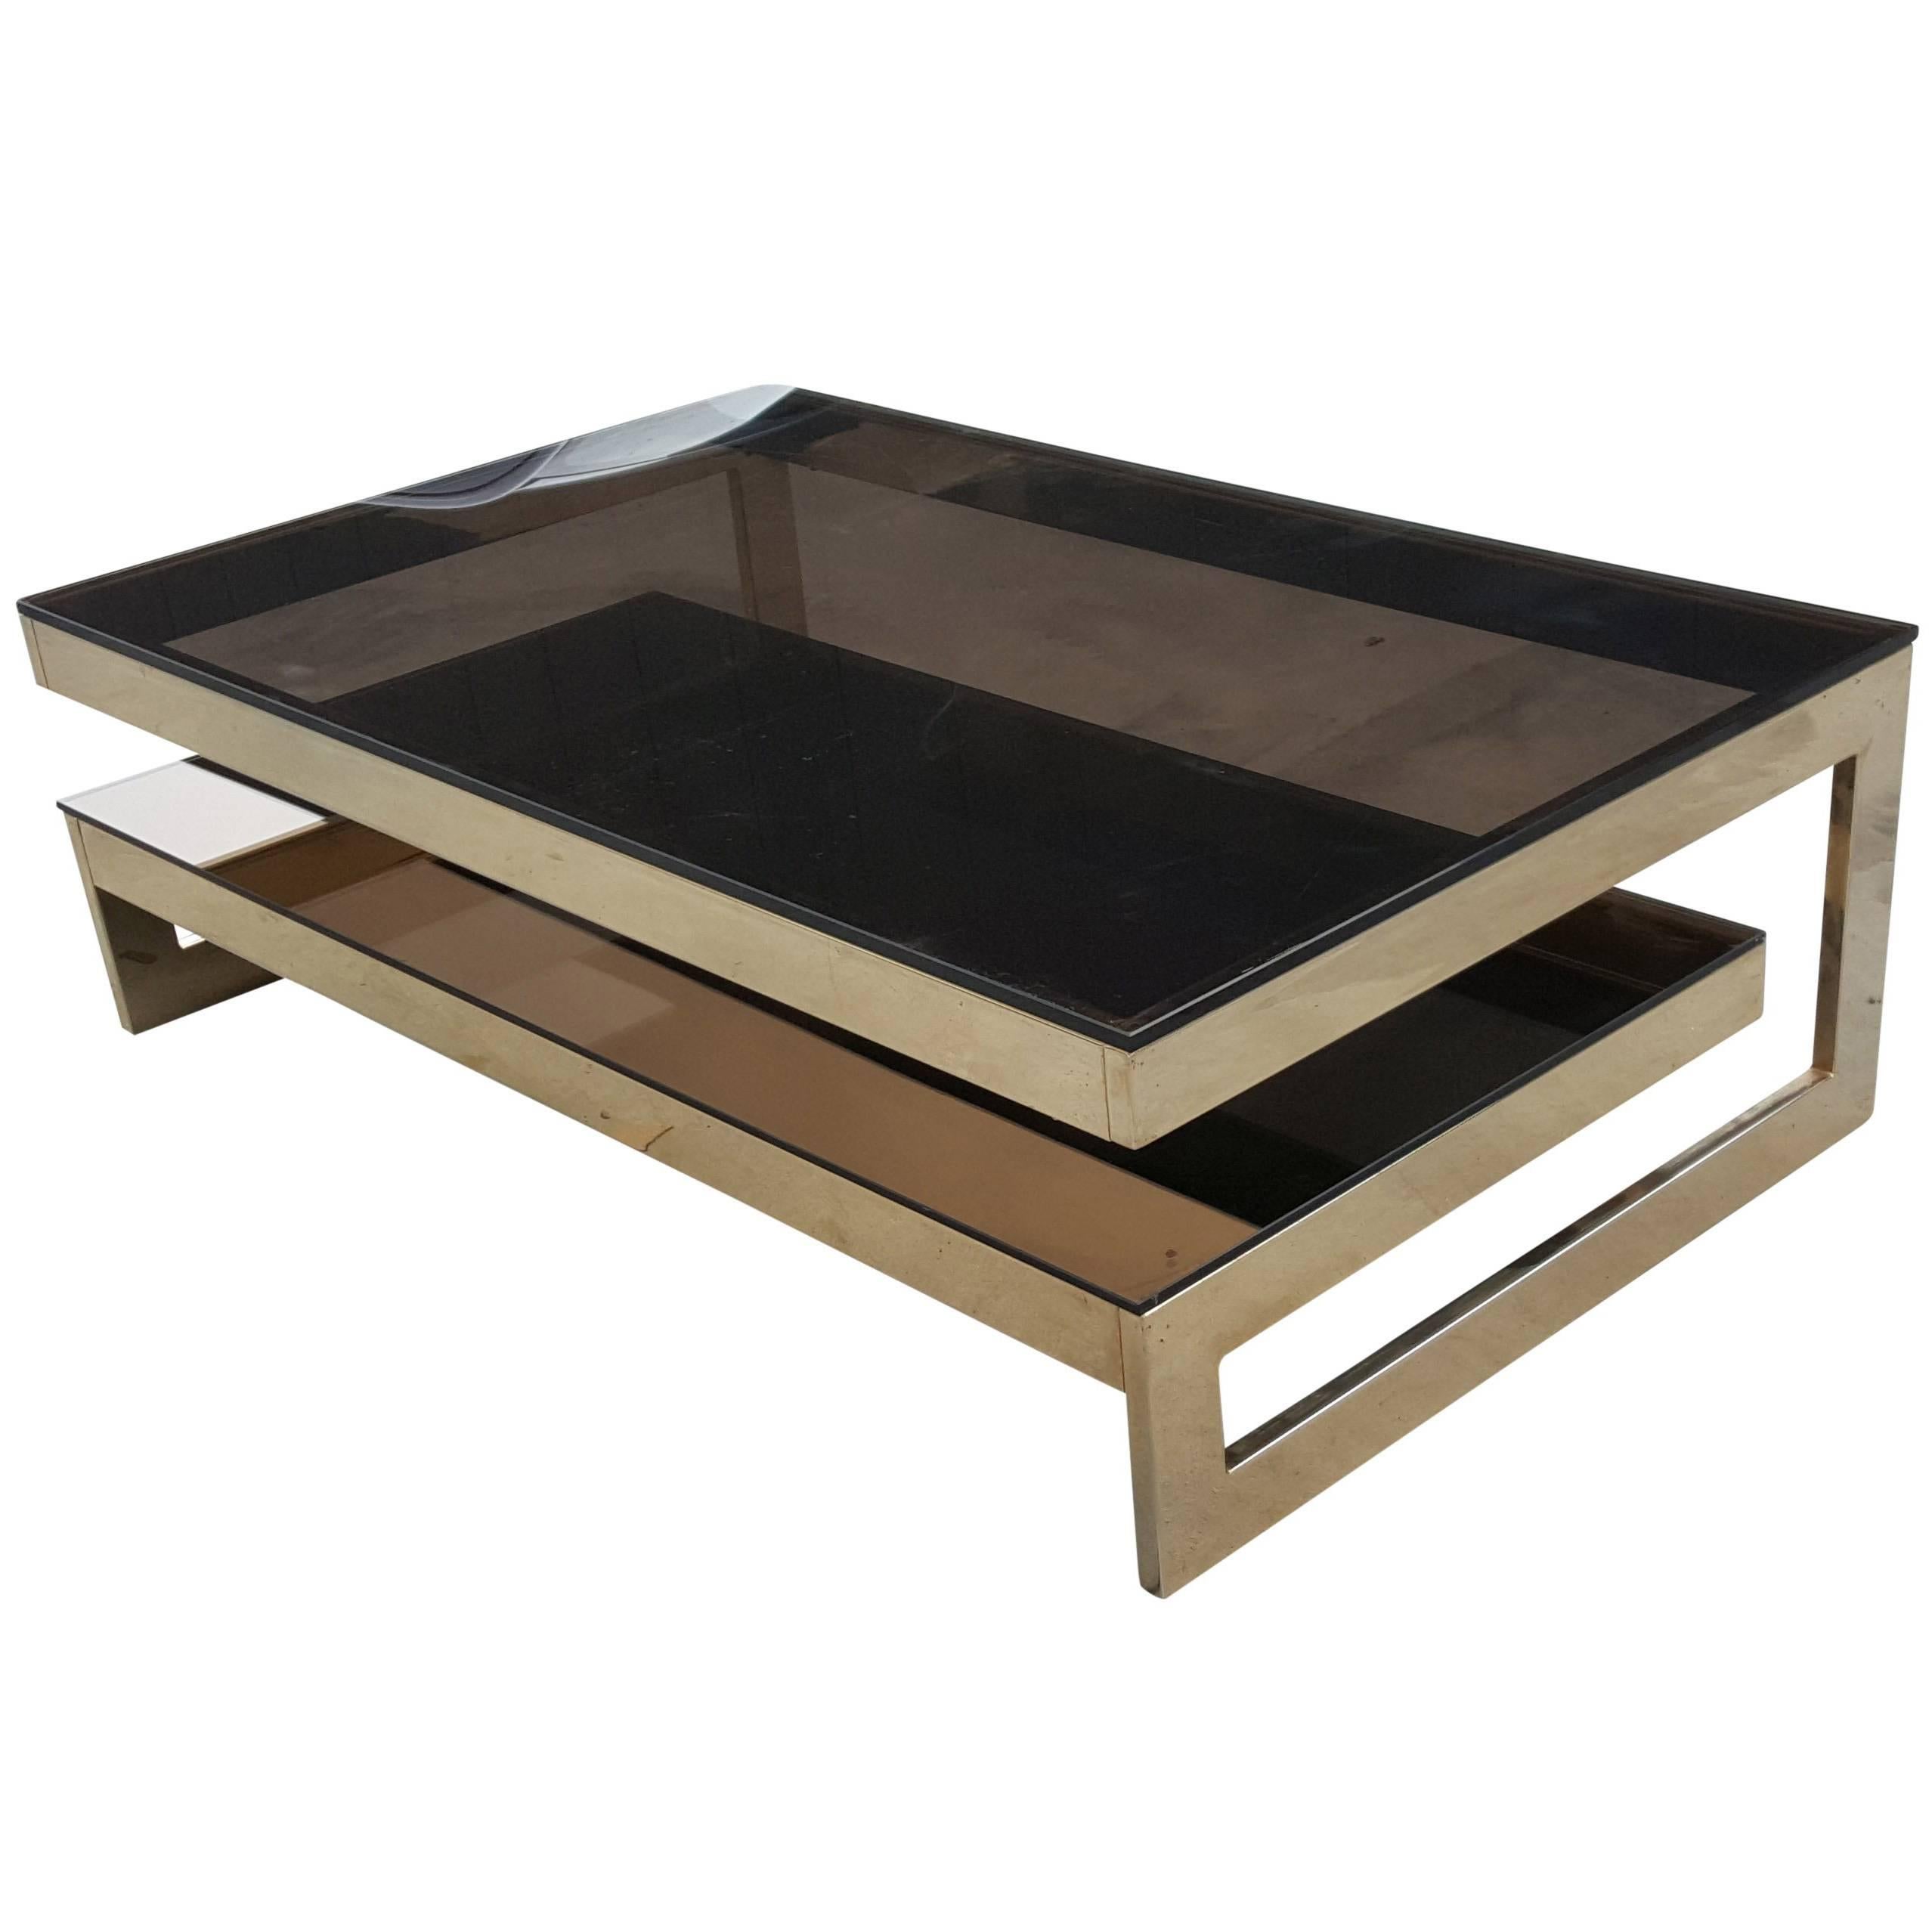 G-Shaped, Gold-Plated Coffee Table by Belgo Chrome im Angebot